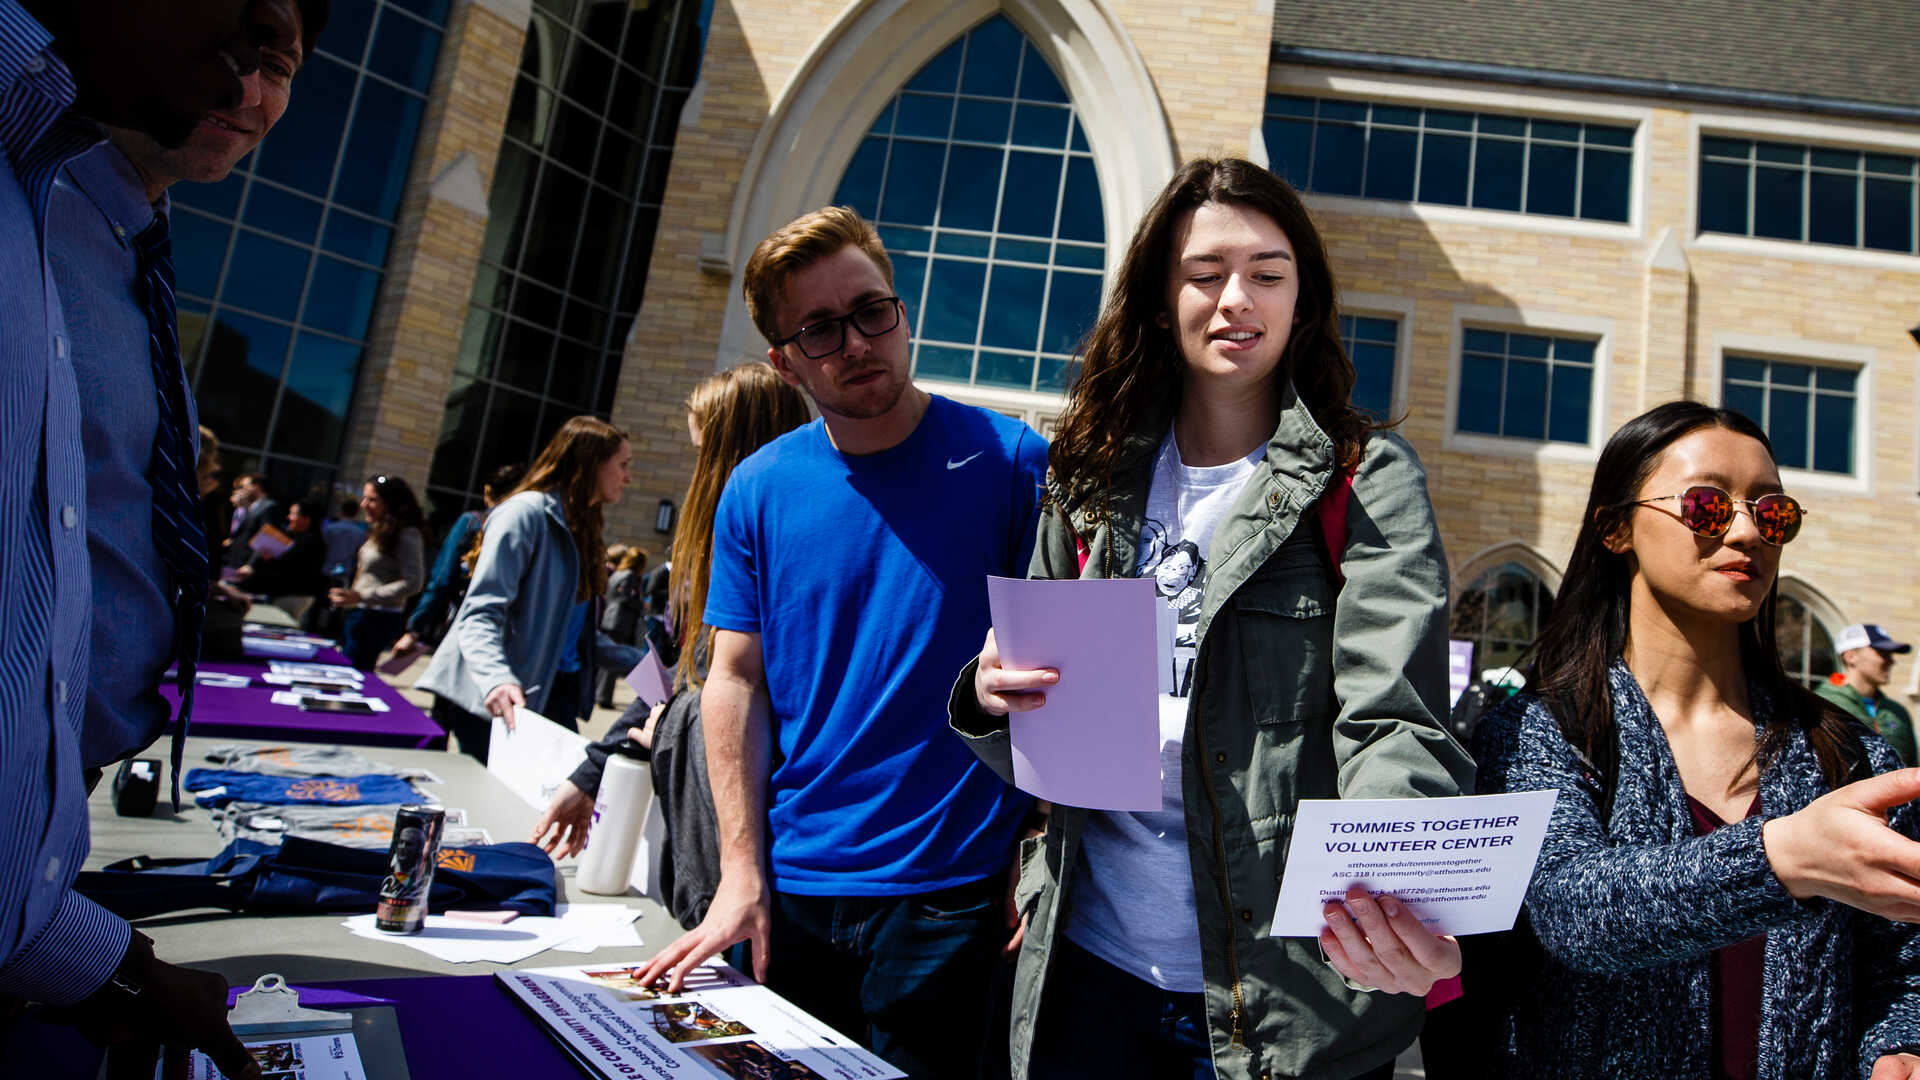 Students talk about registering to vote on the plaza